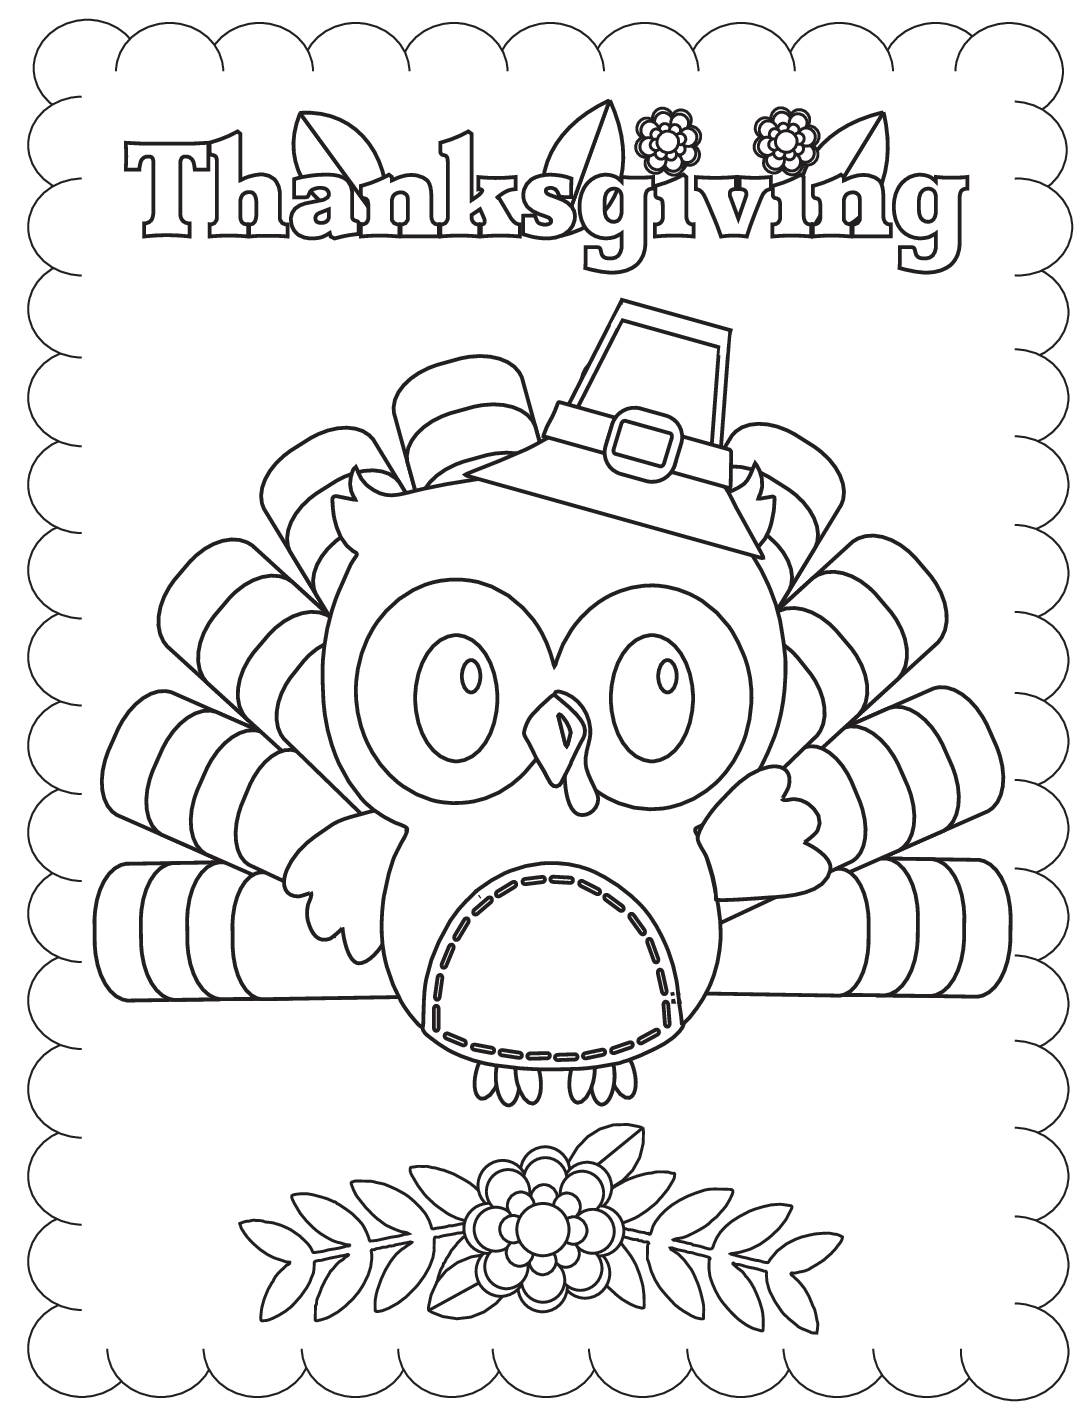 Coloring Page Thanksgiving